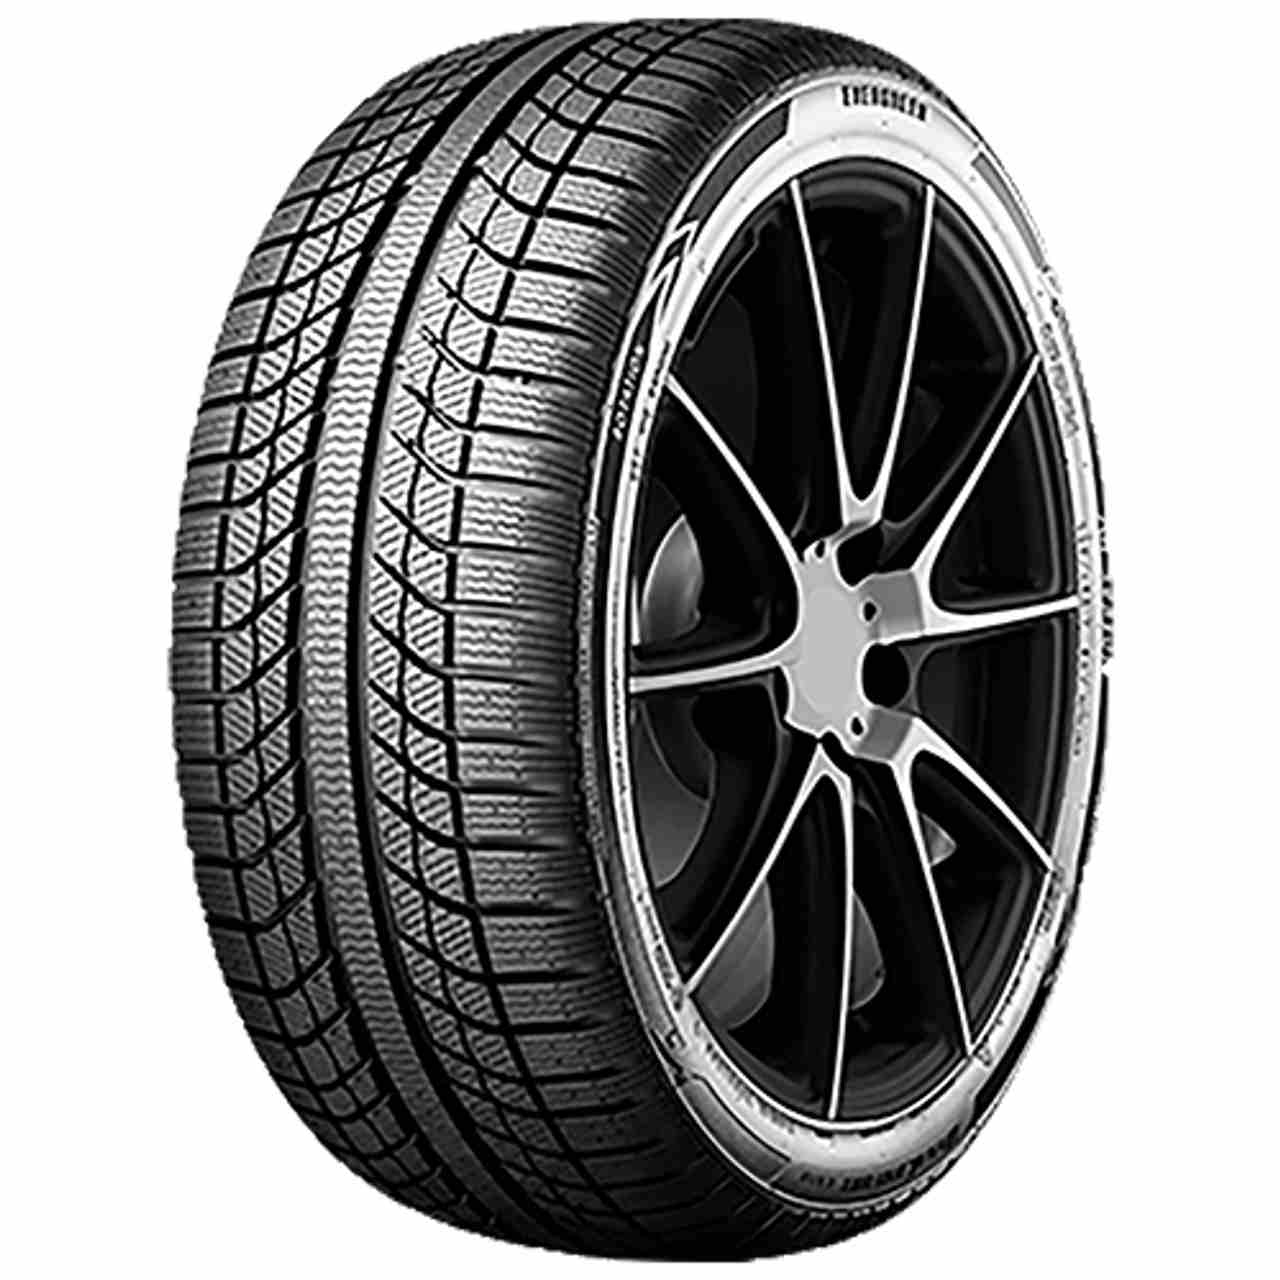 EVERGREEN DYNACOMFORT EA719 175/70R14 88T BSW